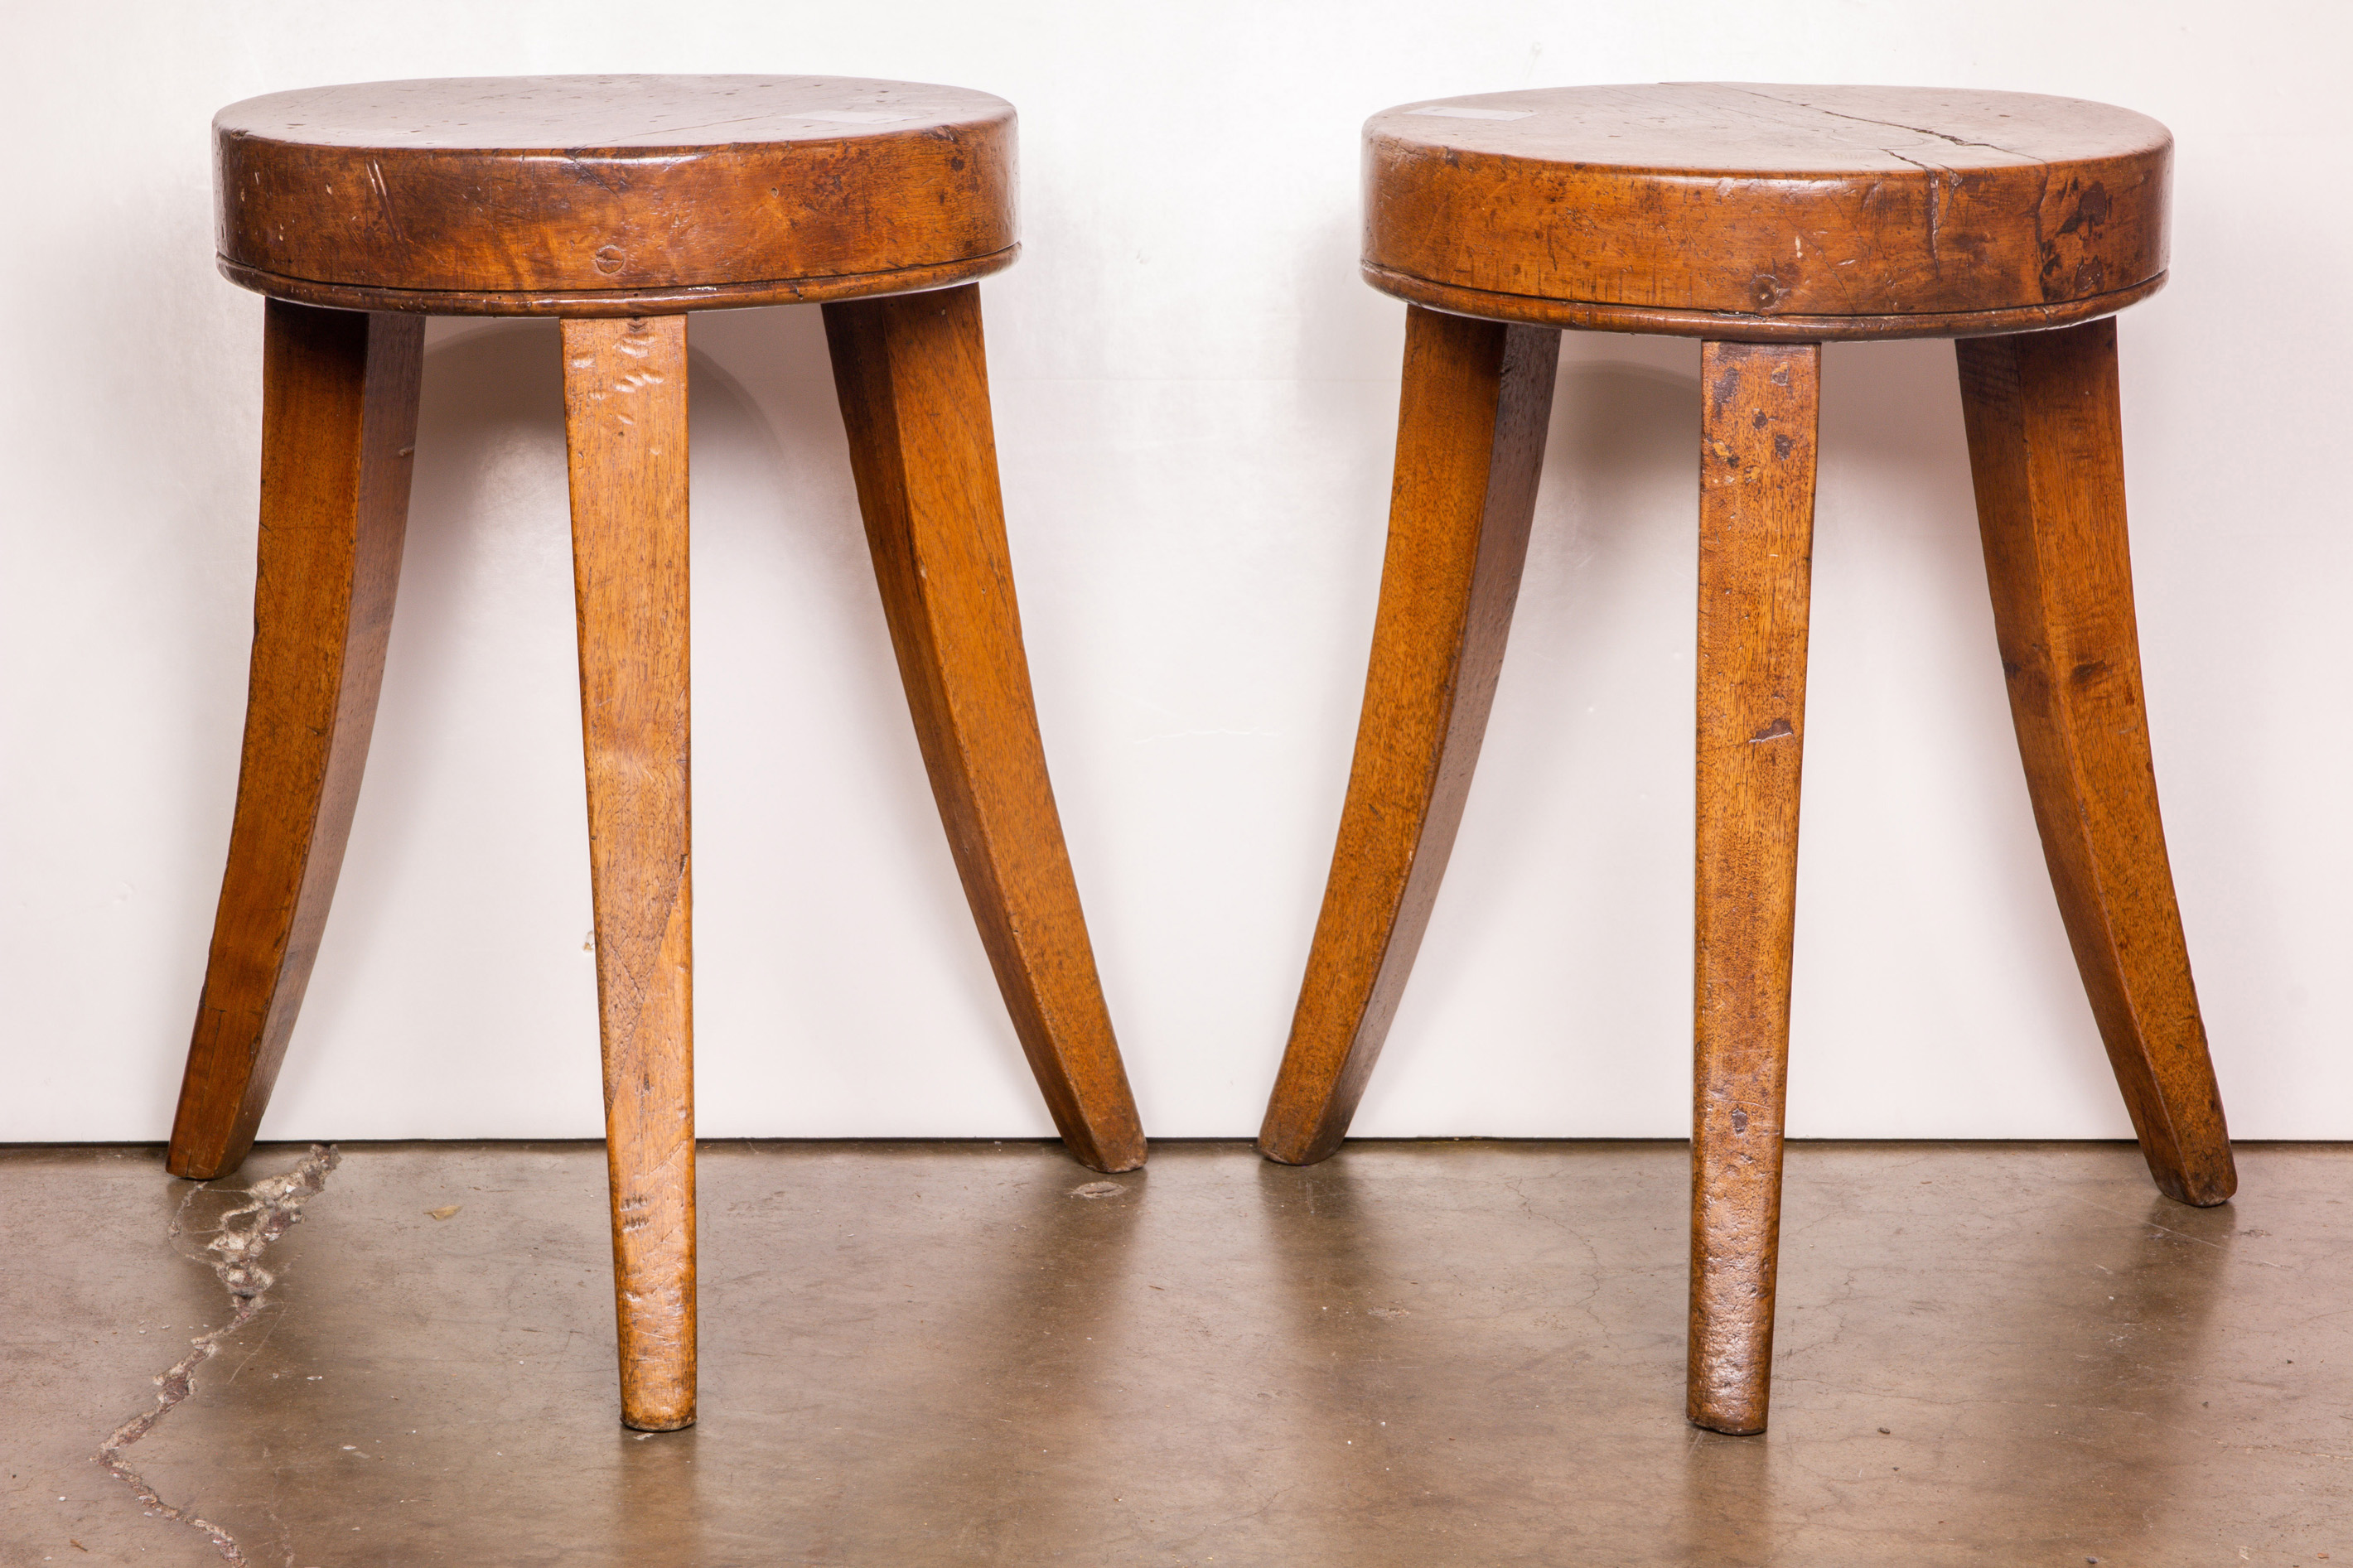 PAIR OF PRIMITIVE STYLE STOOLS 3a43fe